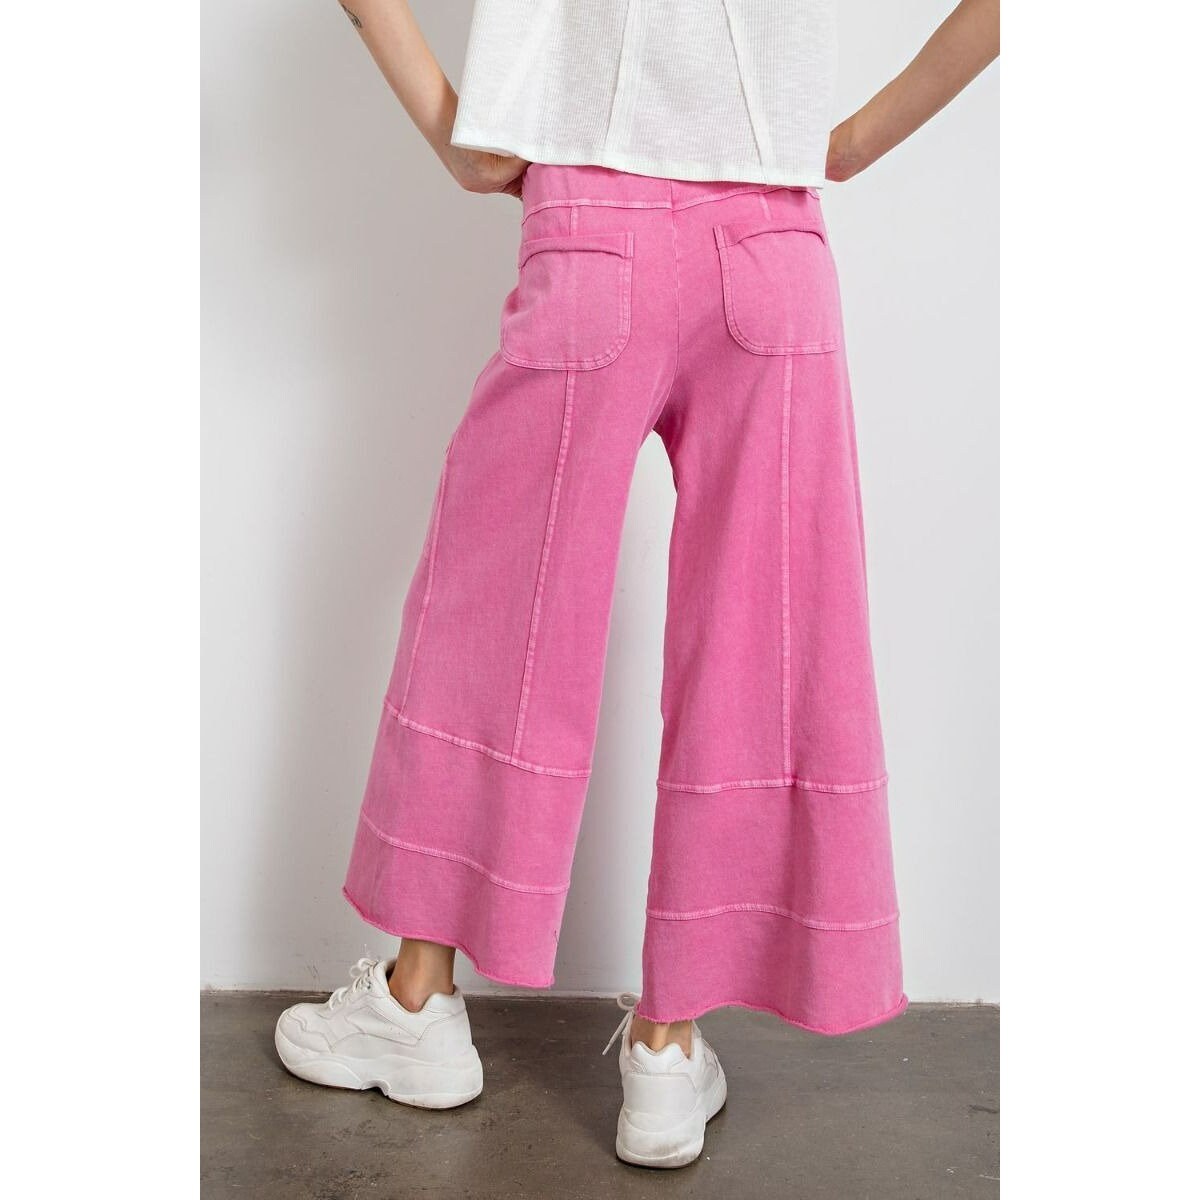 Easel Lazy Days Mineral Washed Wide Leg Pants in Barbie Pink - Etsy